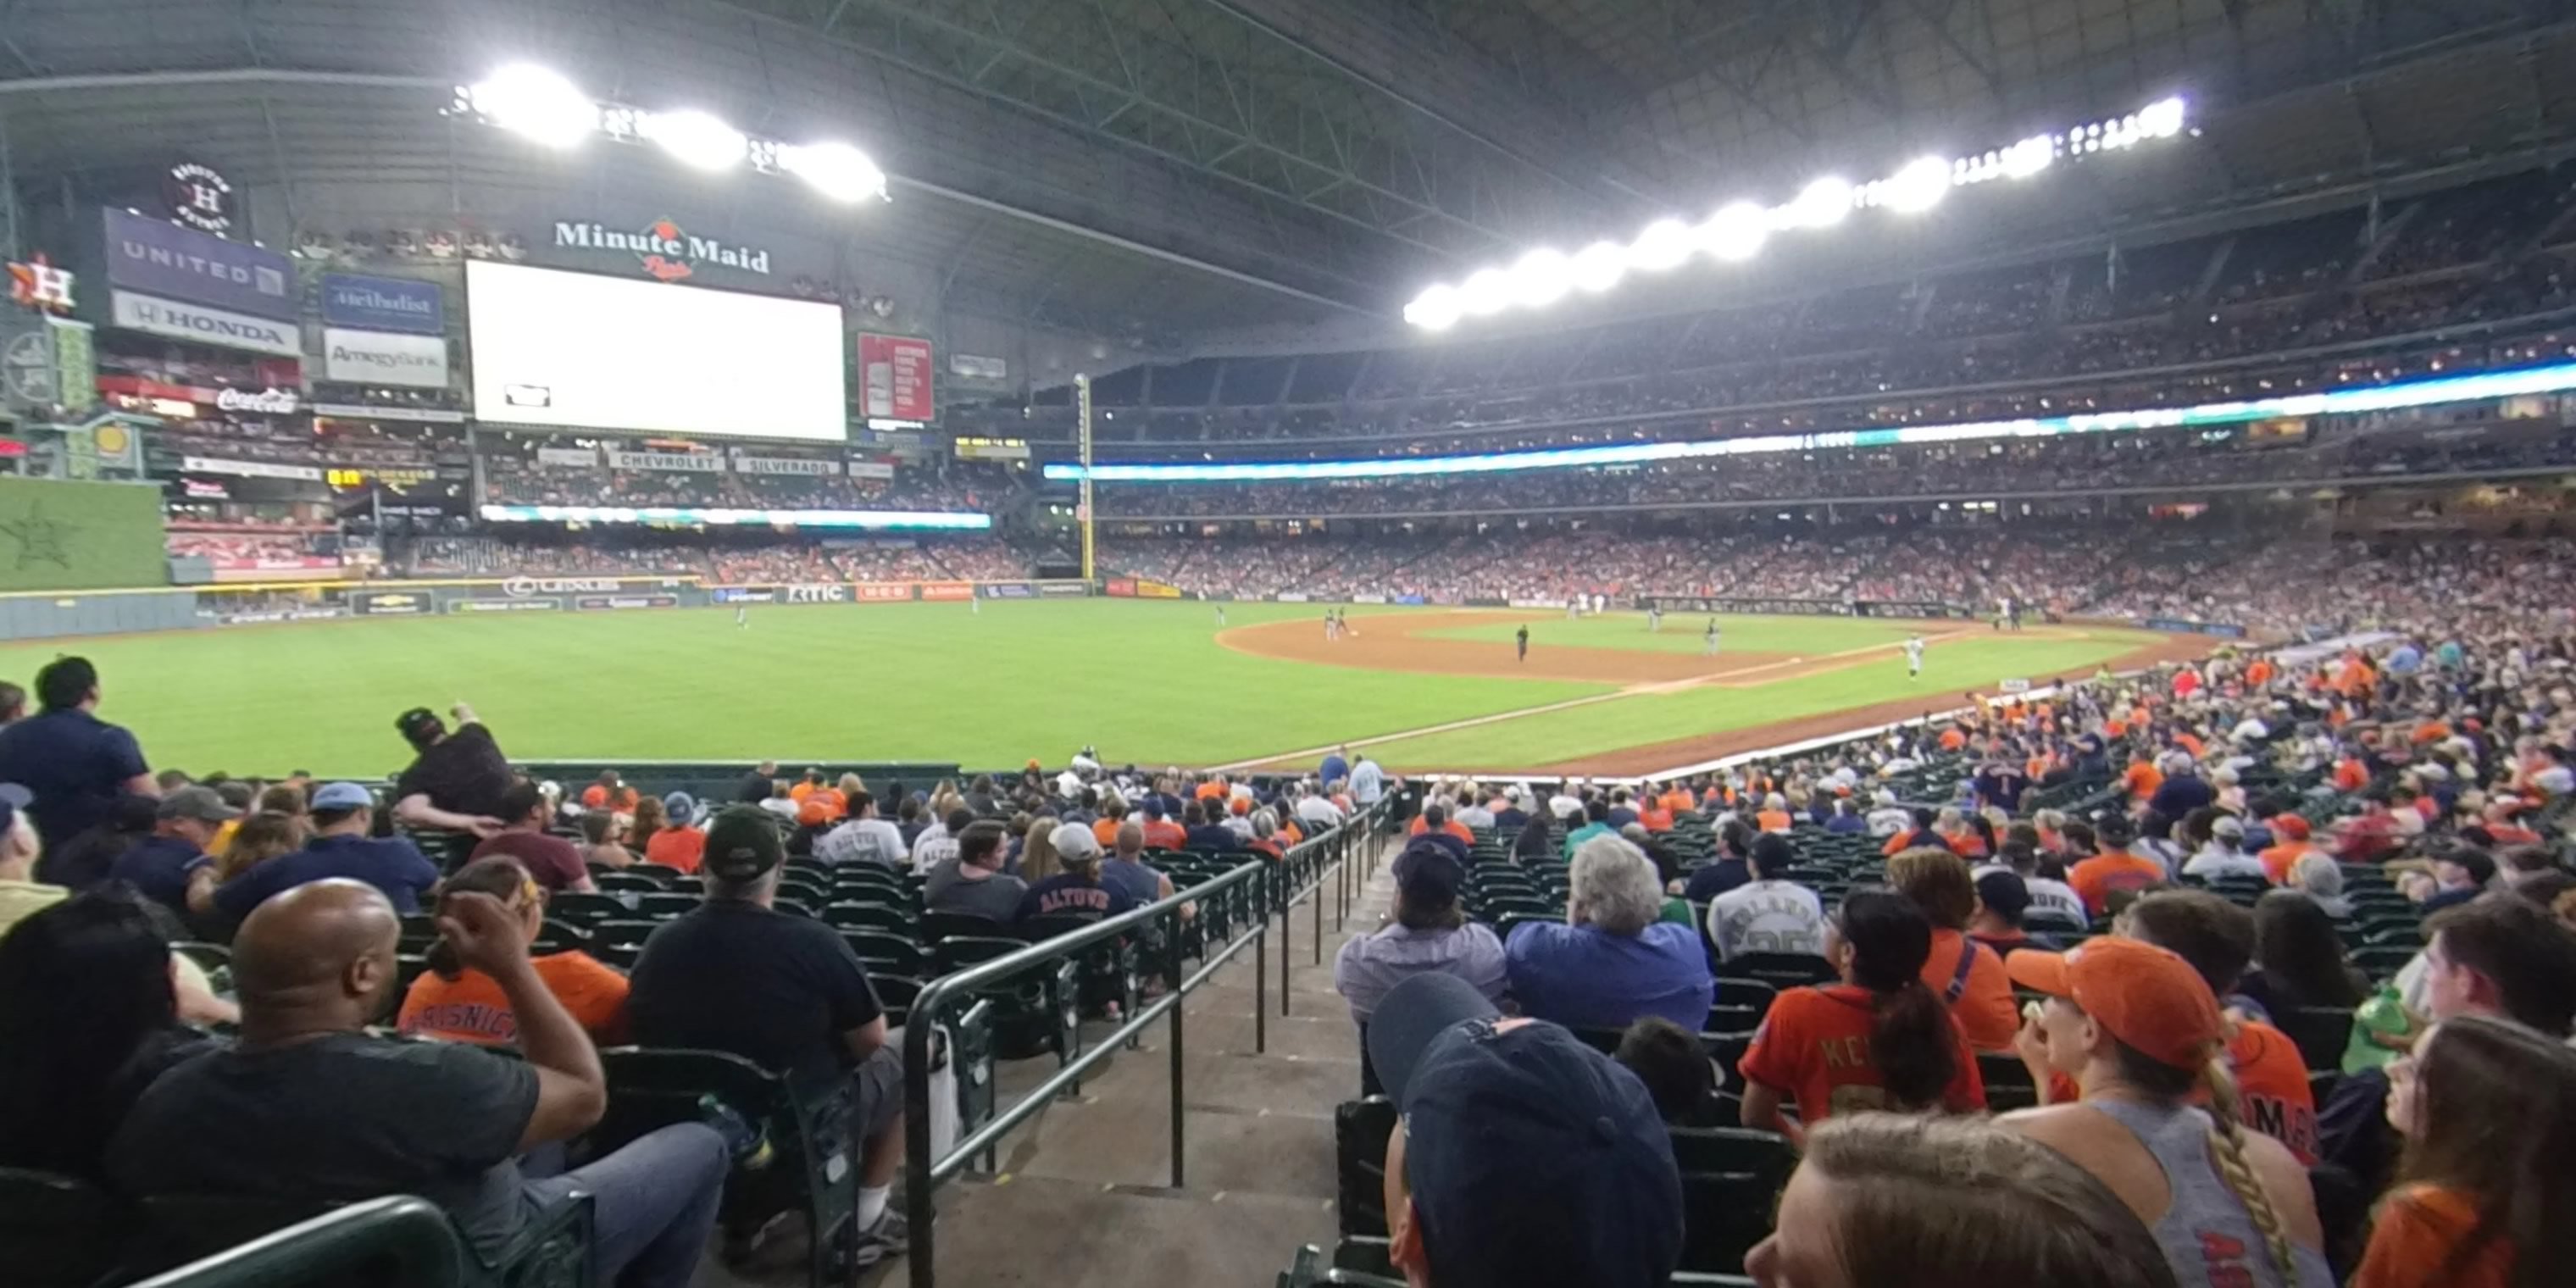 section 106 panoramic seat view  for baseball - minute maid park